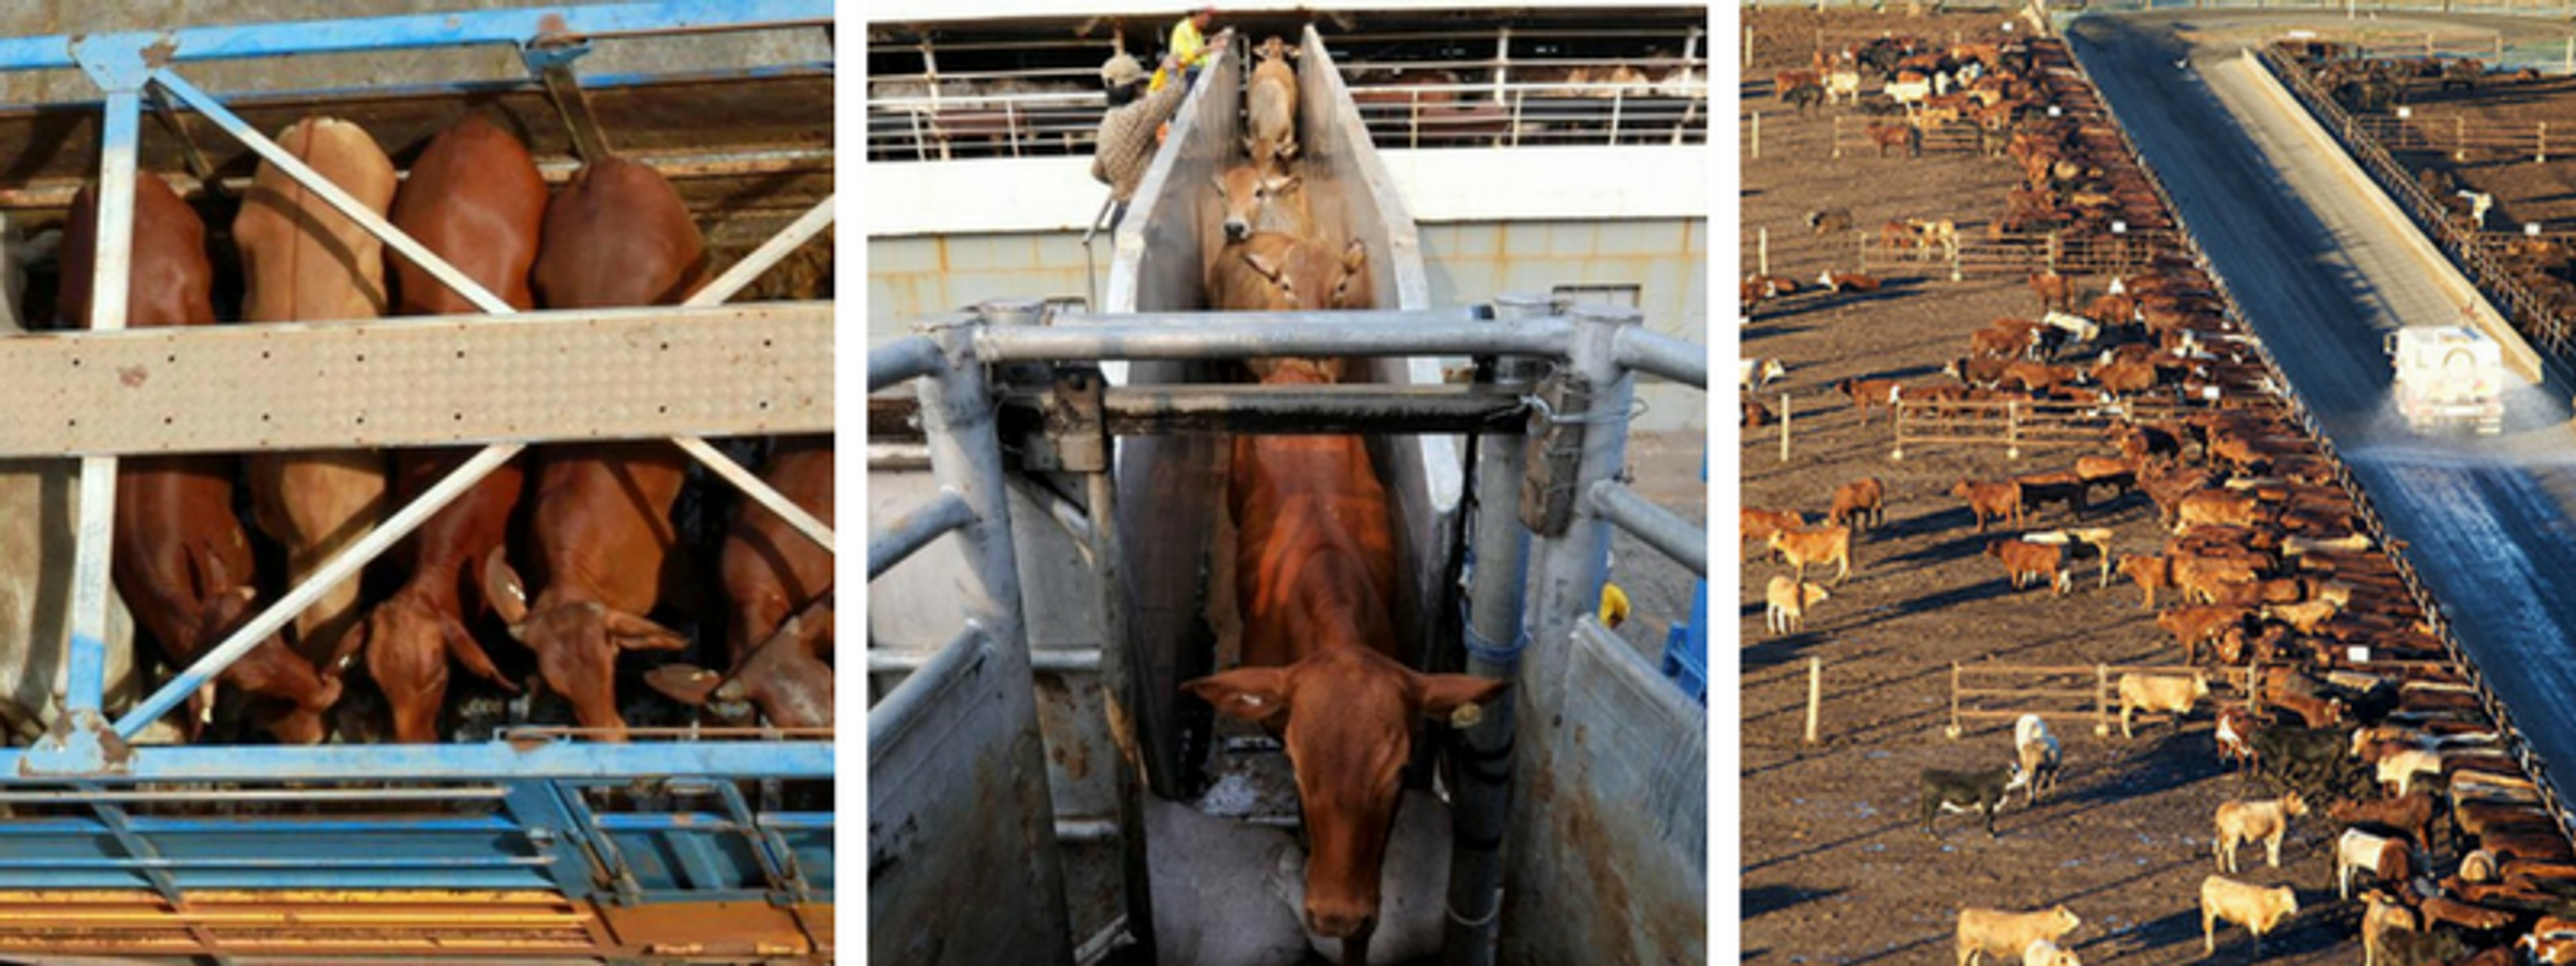 Image on the left is of brown cows packed tightly in a truck. The middle photo is of a brown cow being loaded on to a ship. The right photo is a group of cows in a feeding lot with a dirt floor and metal structures.